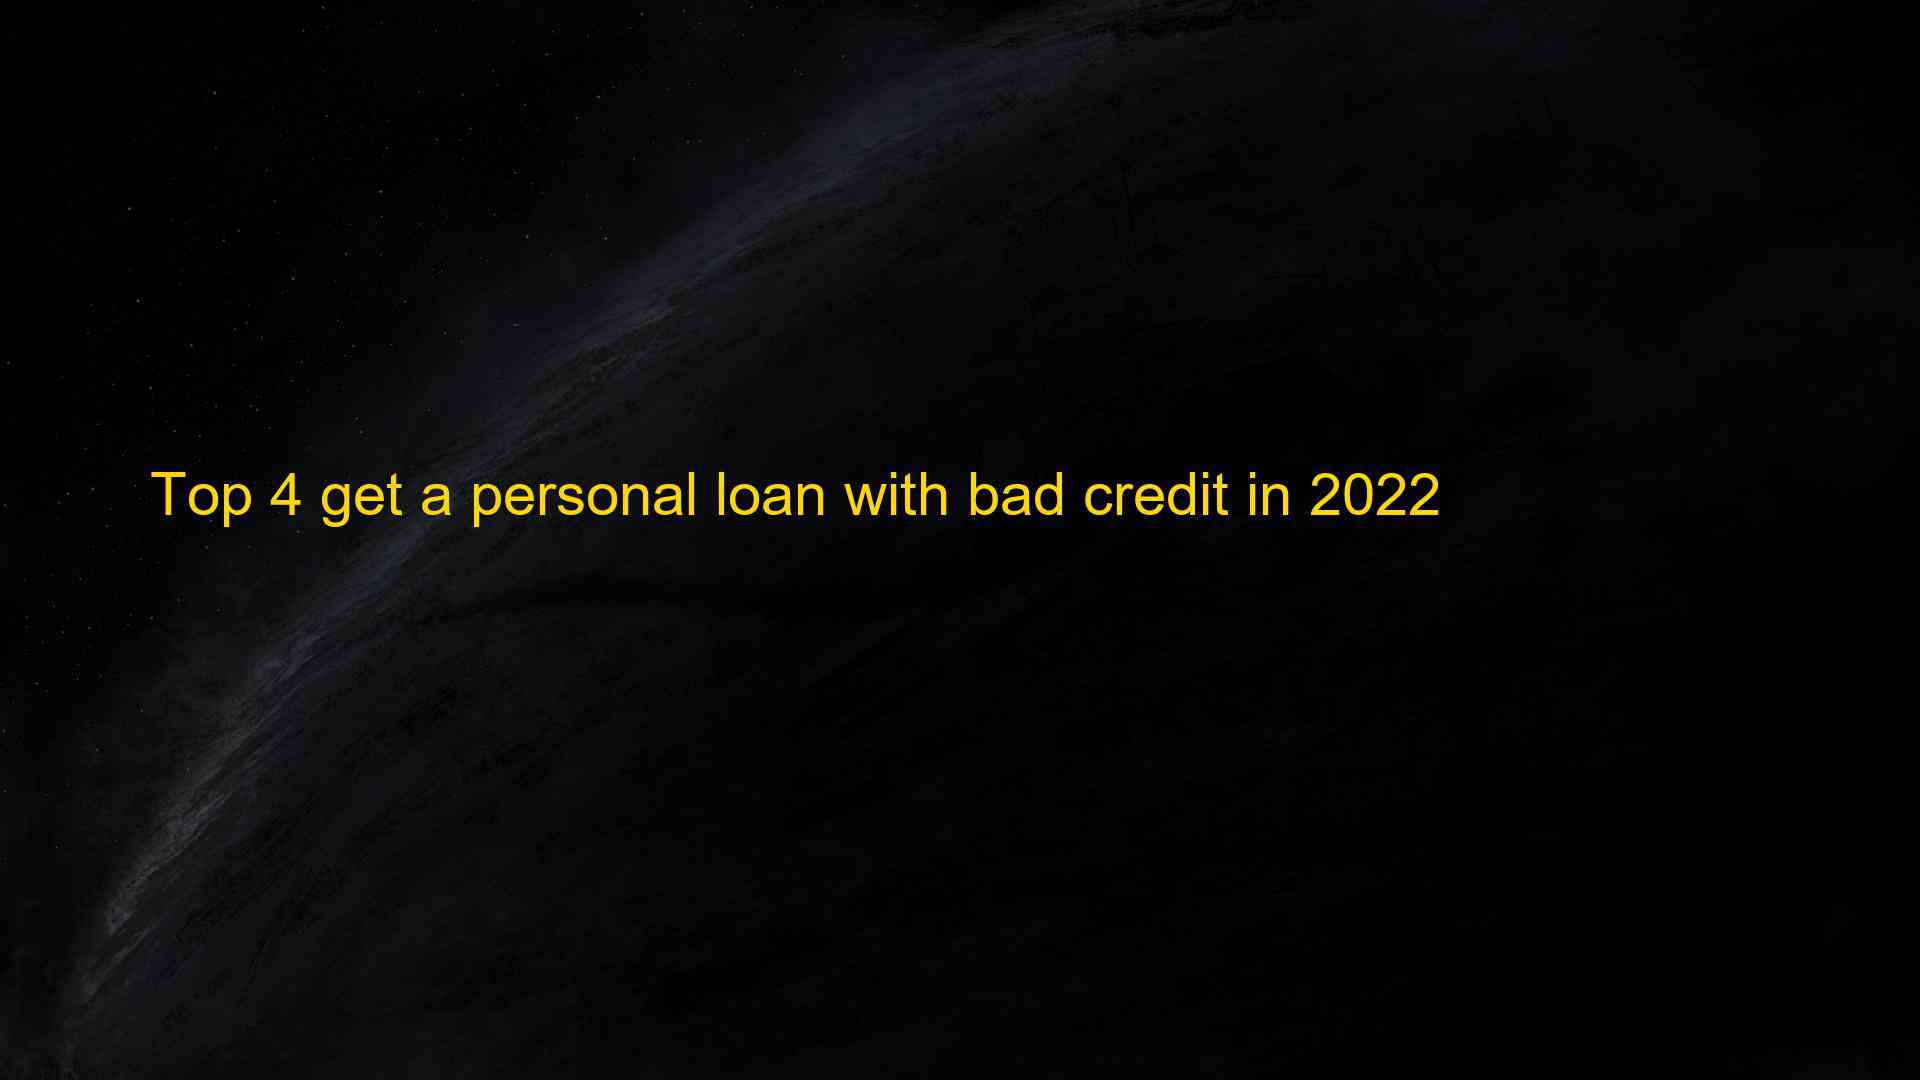 Top 4 get a personal loan with bad credit in 2022 1660194071